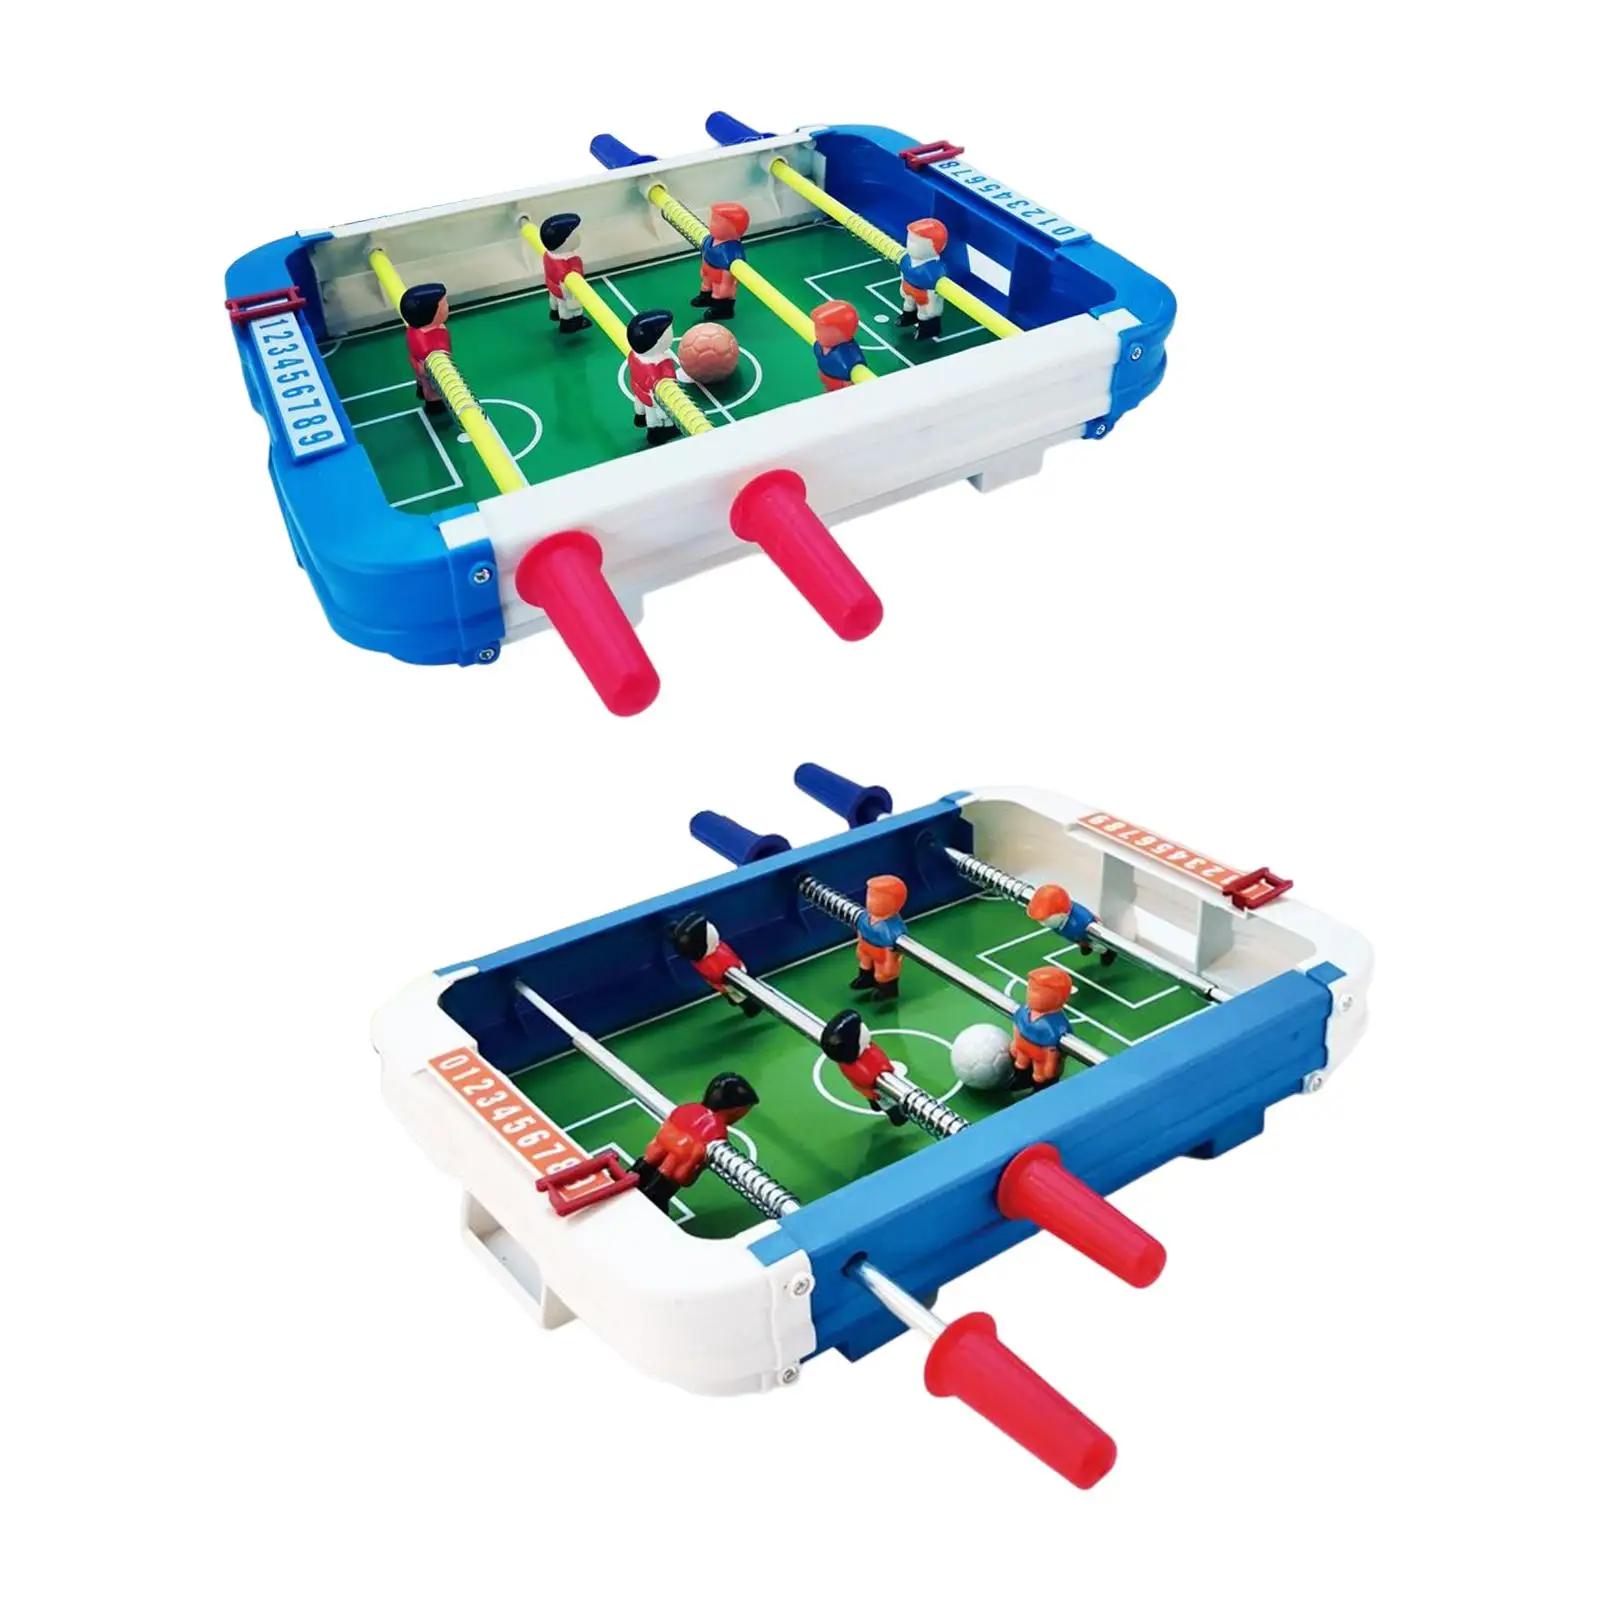 Compact Mini Foosball Table Top Football Game for Kids Birthday Gifts